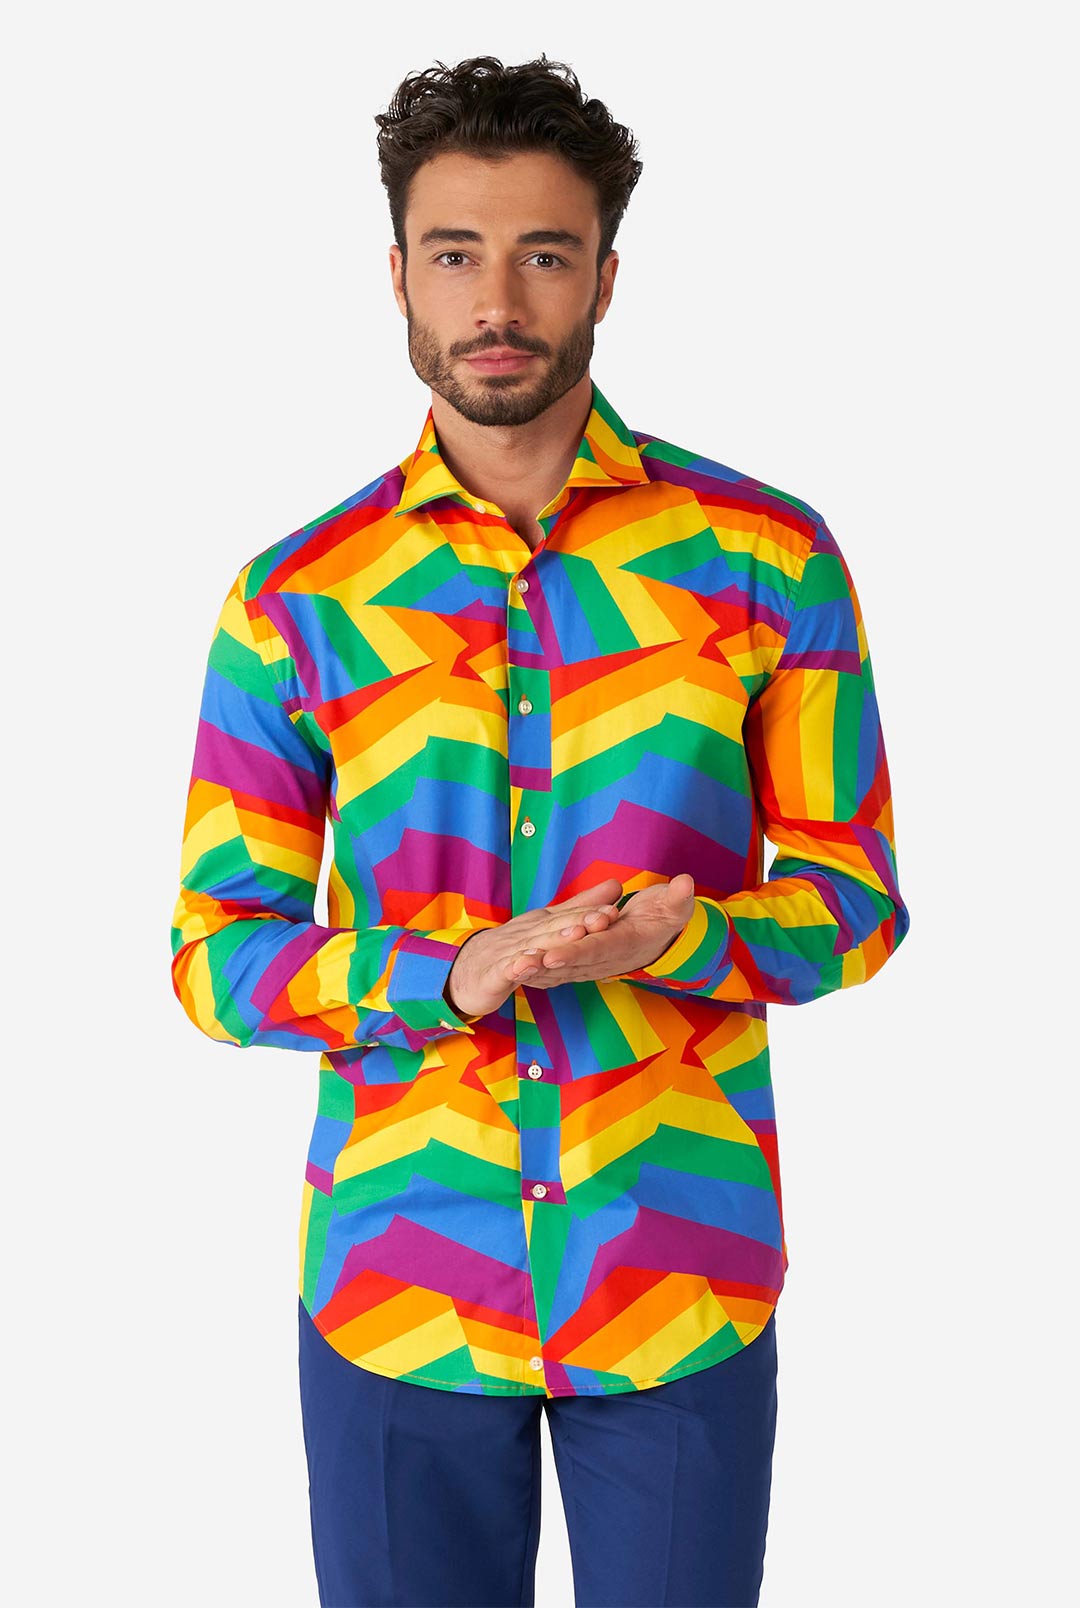 Clothes for men that are colourful